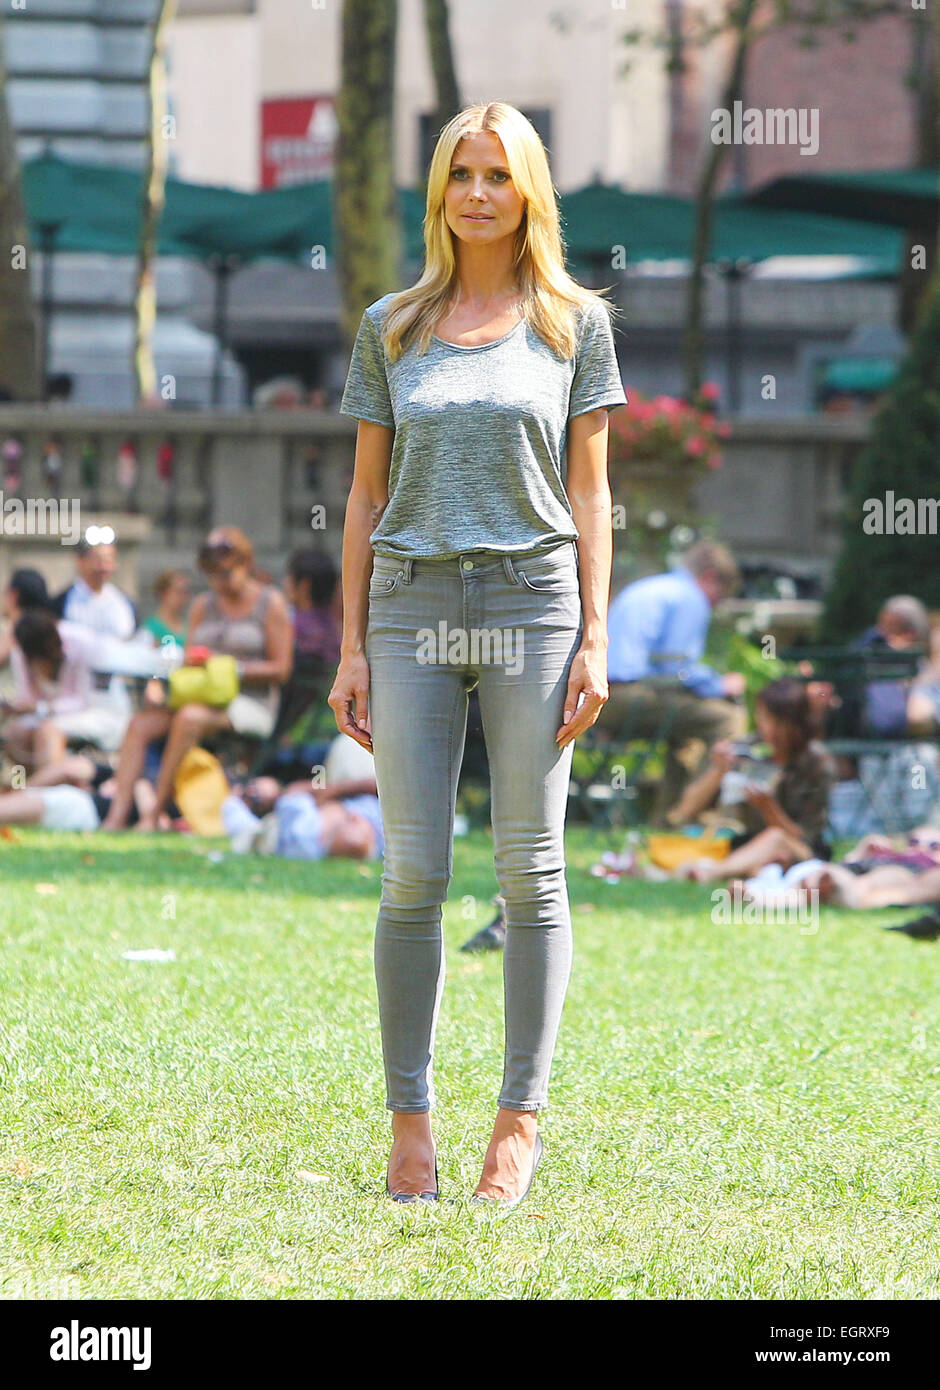 Heidi Klum dressed casually in skinny jeans and a grey top modeling for a  photo shoot Featuring: Heidi Klum Where: New York City, United States When:  27 Aug 2014 Stock Photo - Alamy